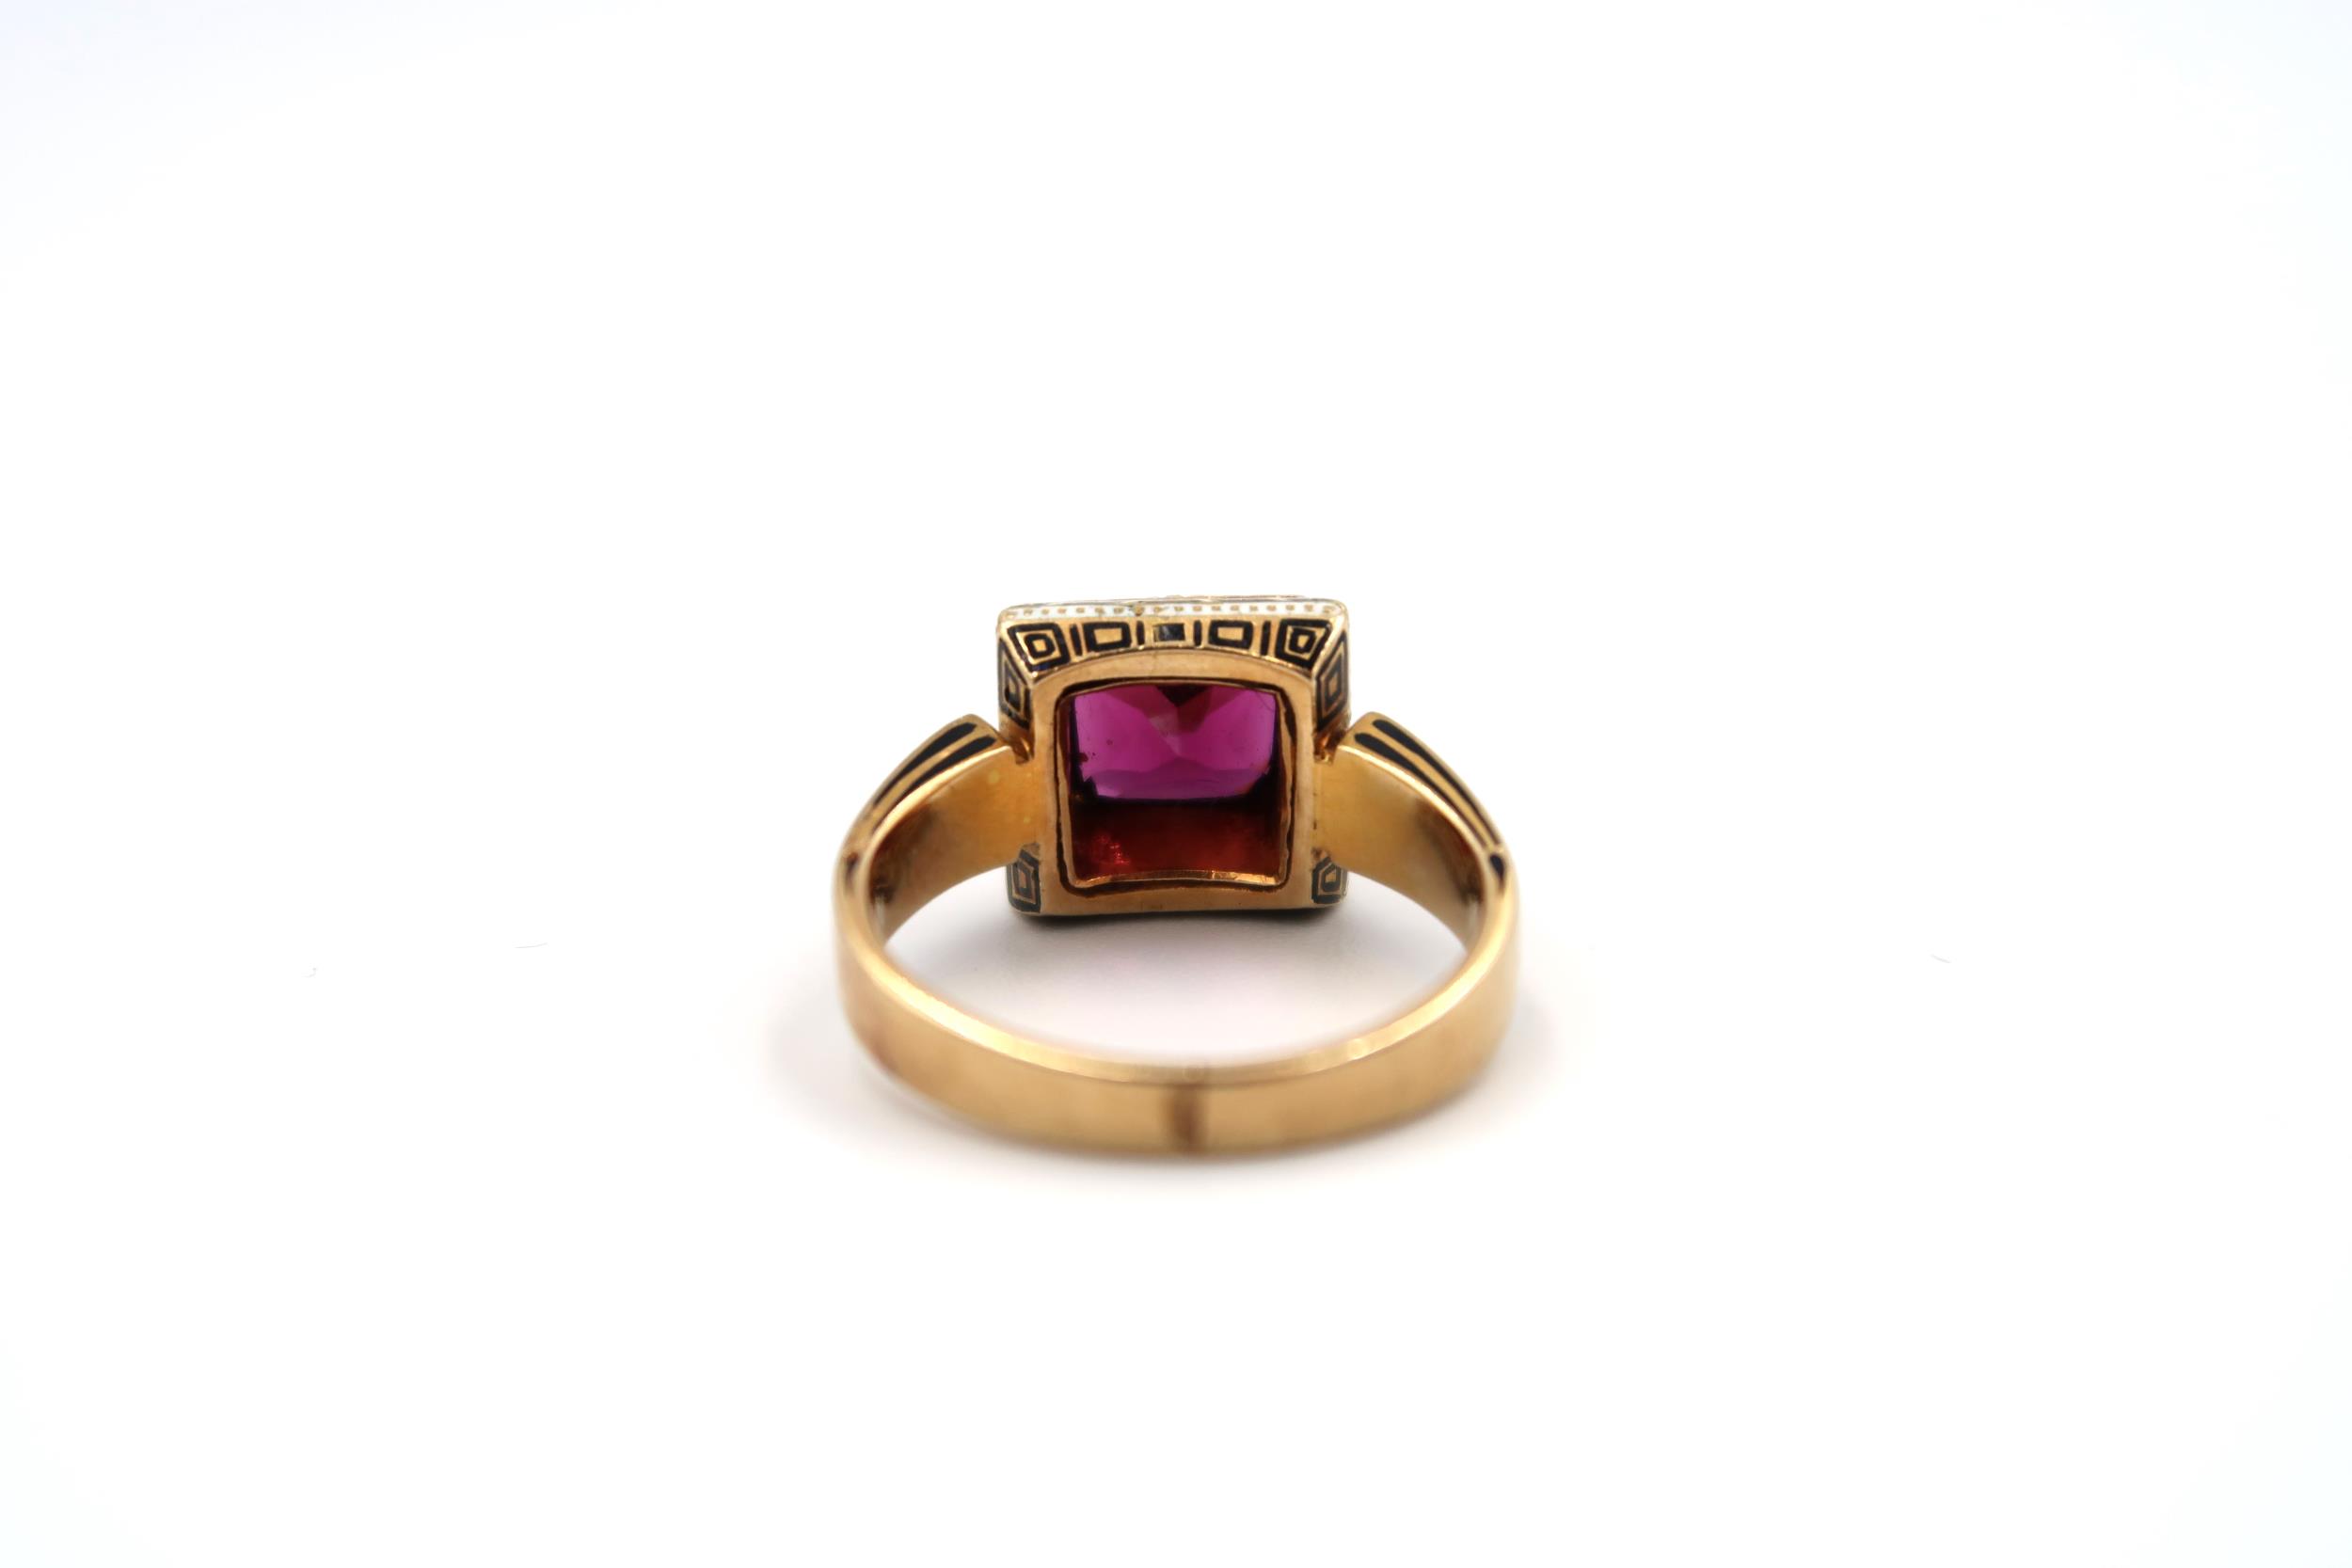 A garnet and enamel ring believed to be 19th century. Tested gold 18ct. Weight 6.47 grams. Ring size - Image 3 of 3